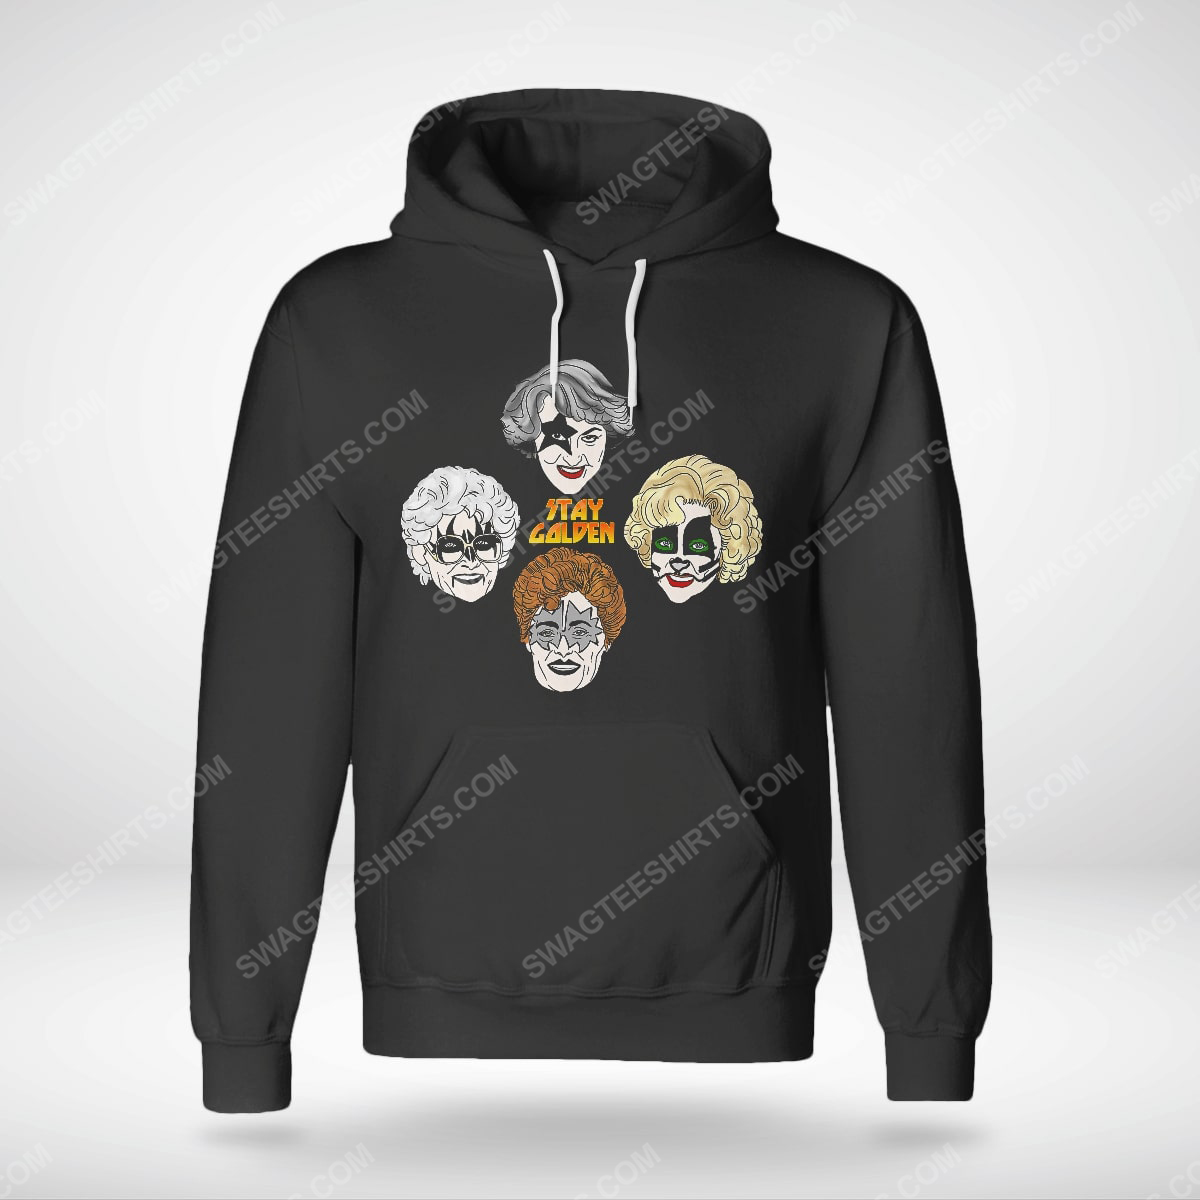 Kiss and the golden girls stay golden hoodie(1)